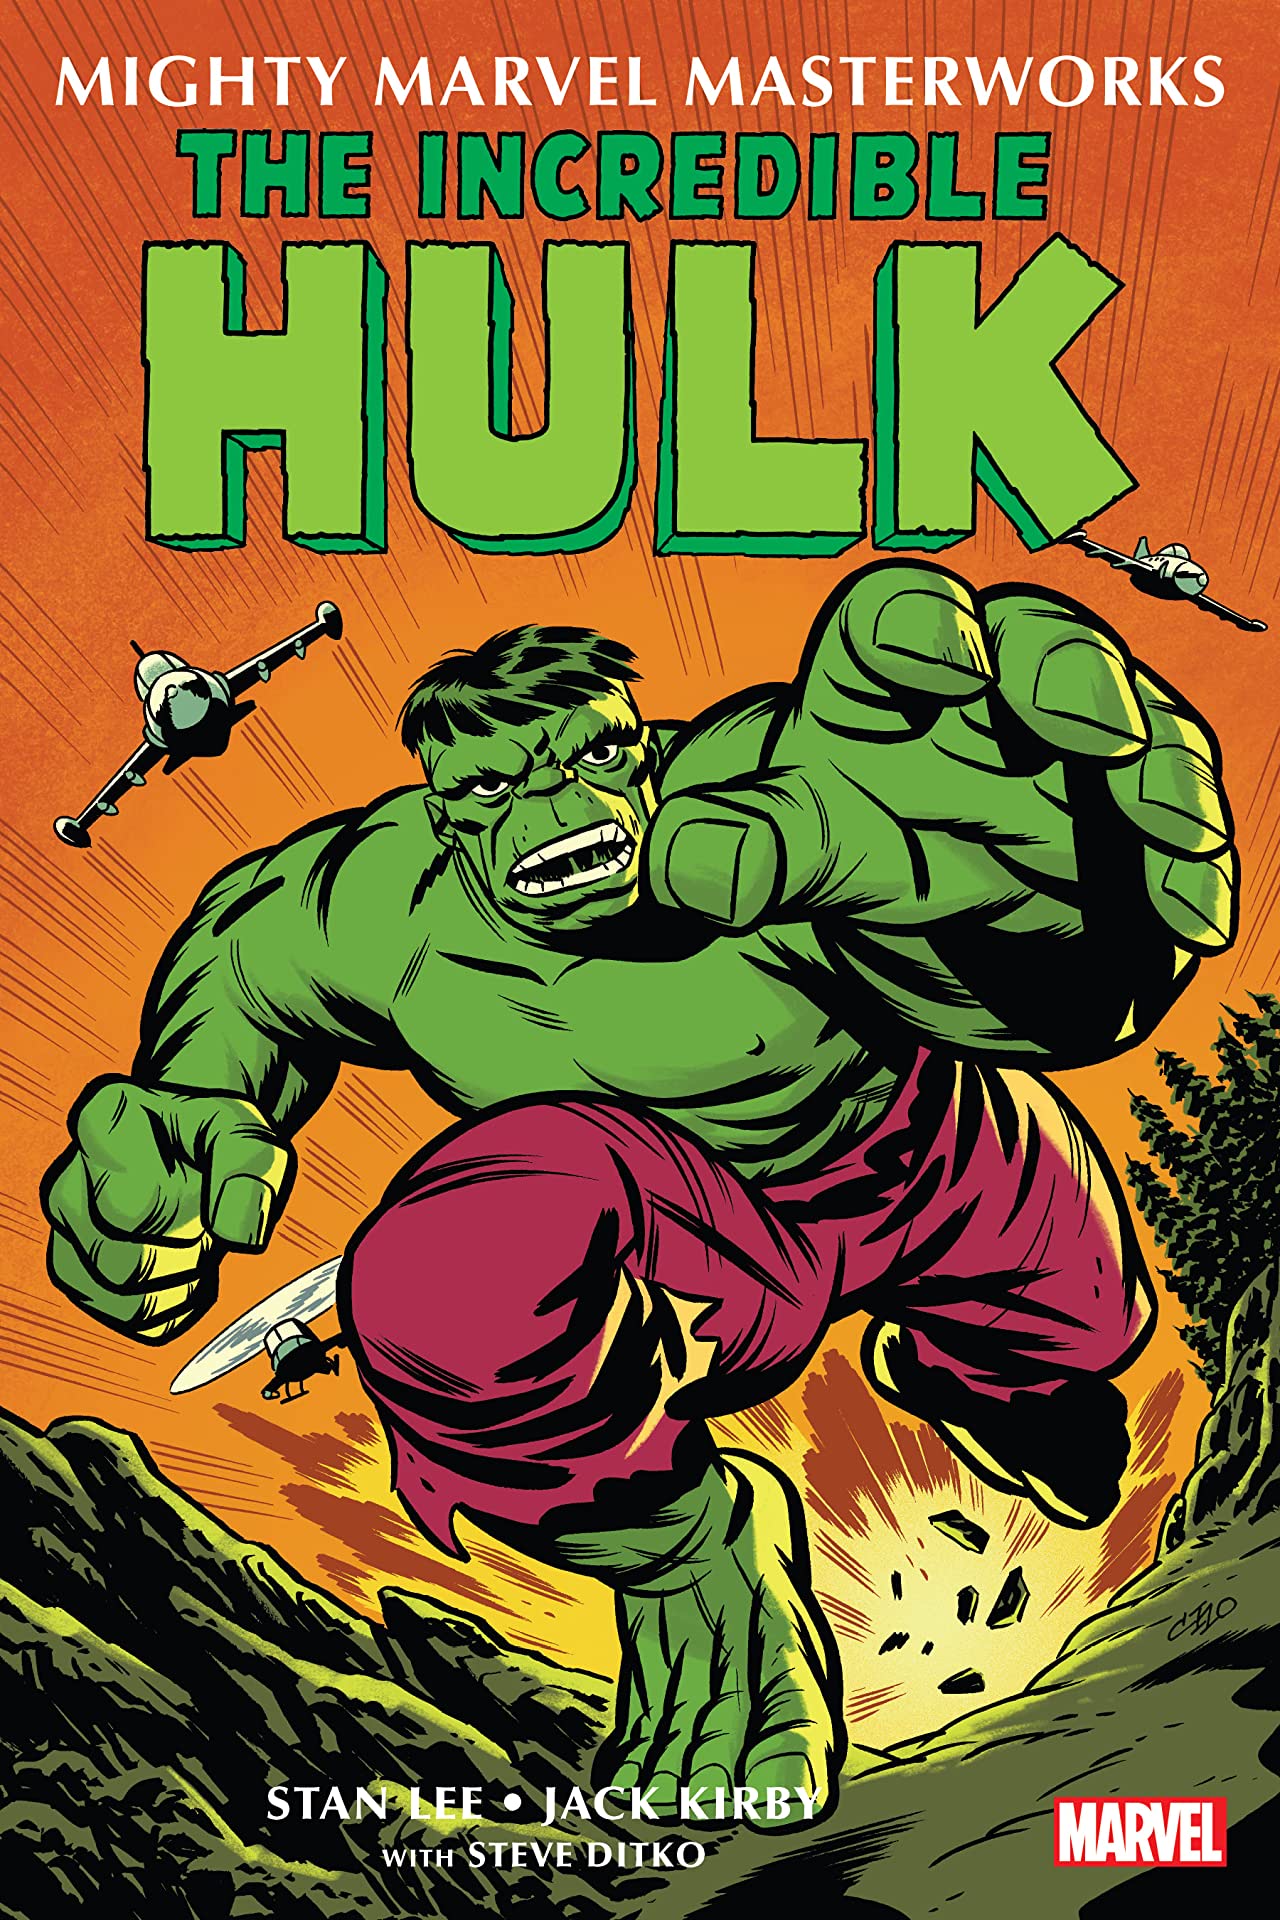 Mighty Marvel Masterworks: The Incredible Hulk Vol. 1: The Green Goliath (Trade Paperback)